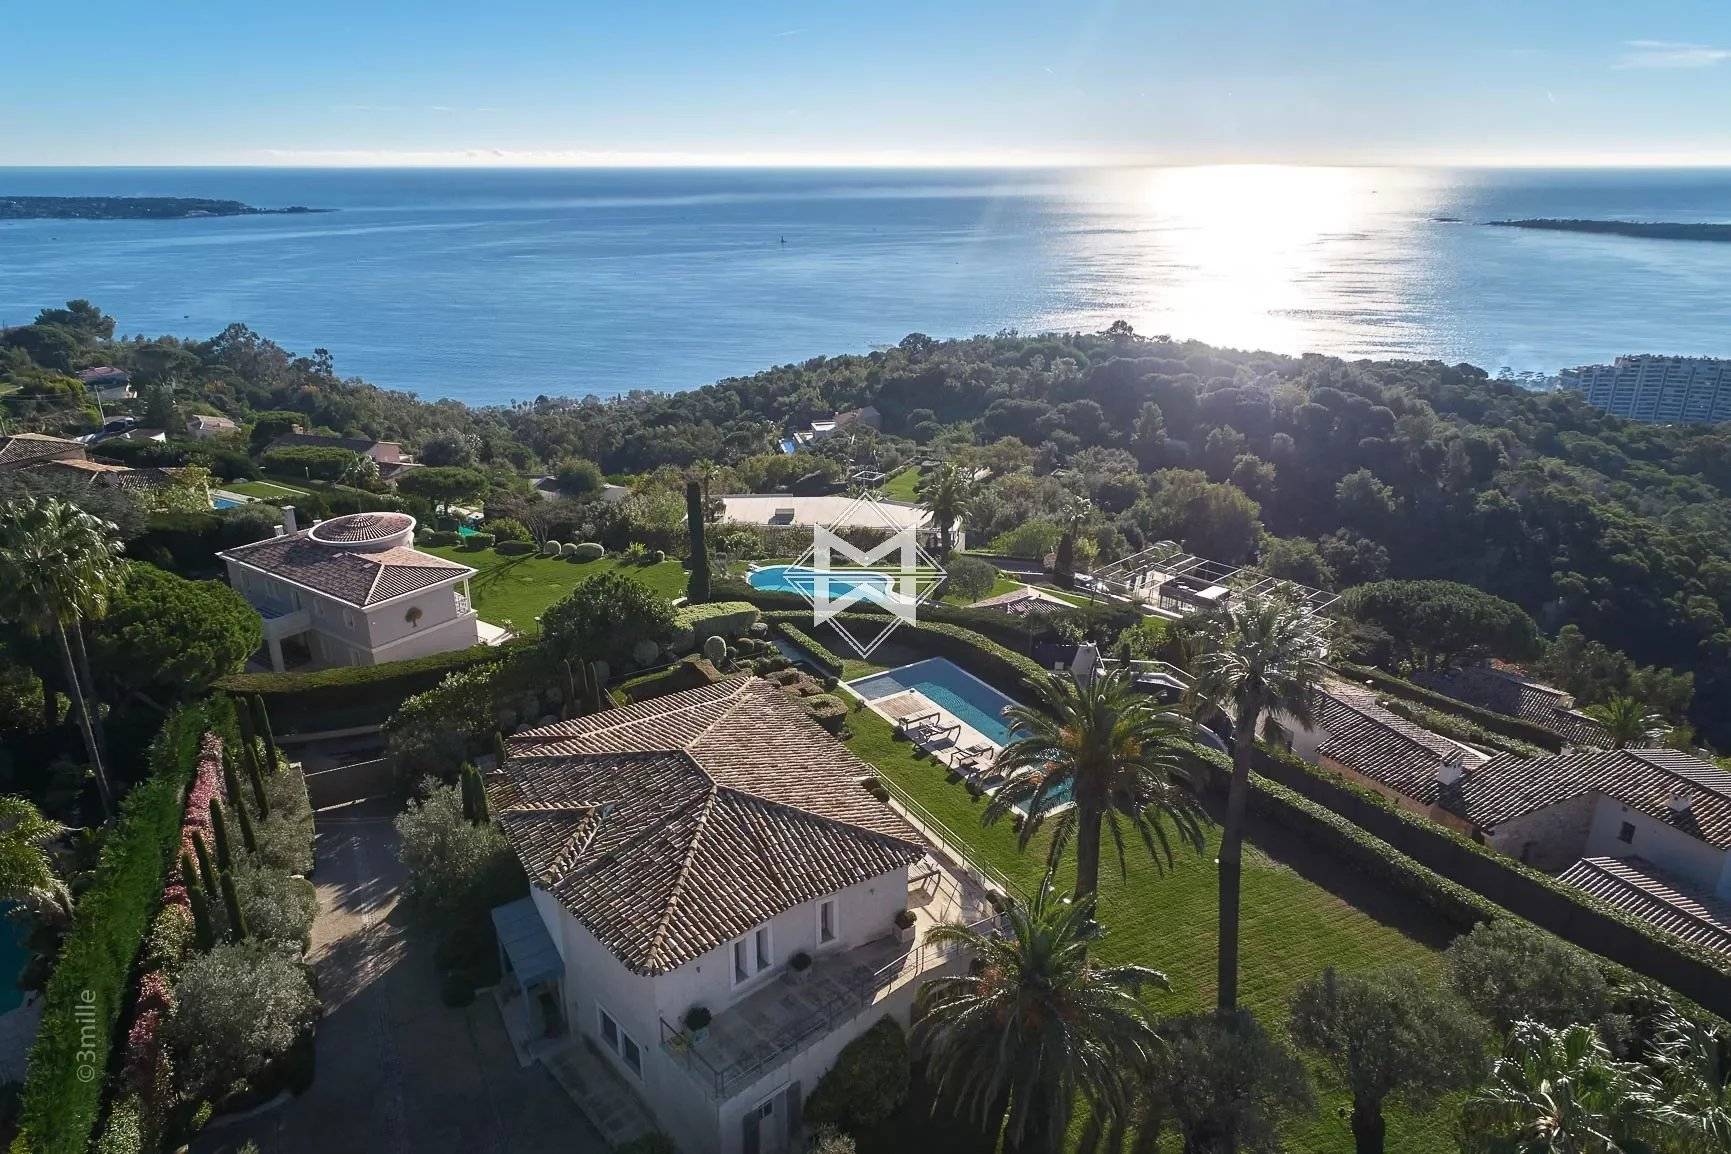 Sale - Villa - Cannes - Splendid villa featuring exclusive interior design and panoramic view -  370 m² living area on a flat plot of 2000 m² land